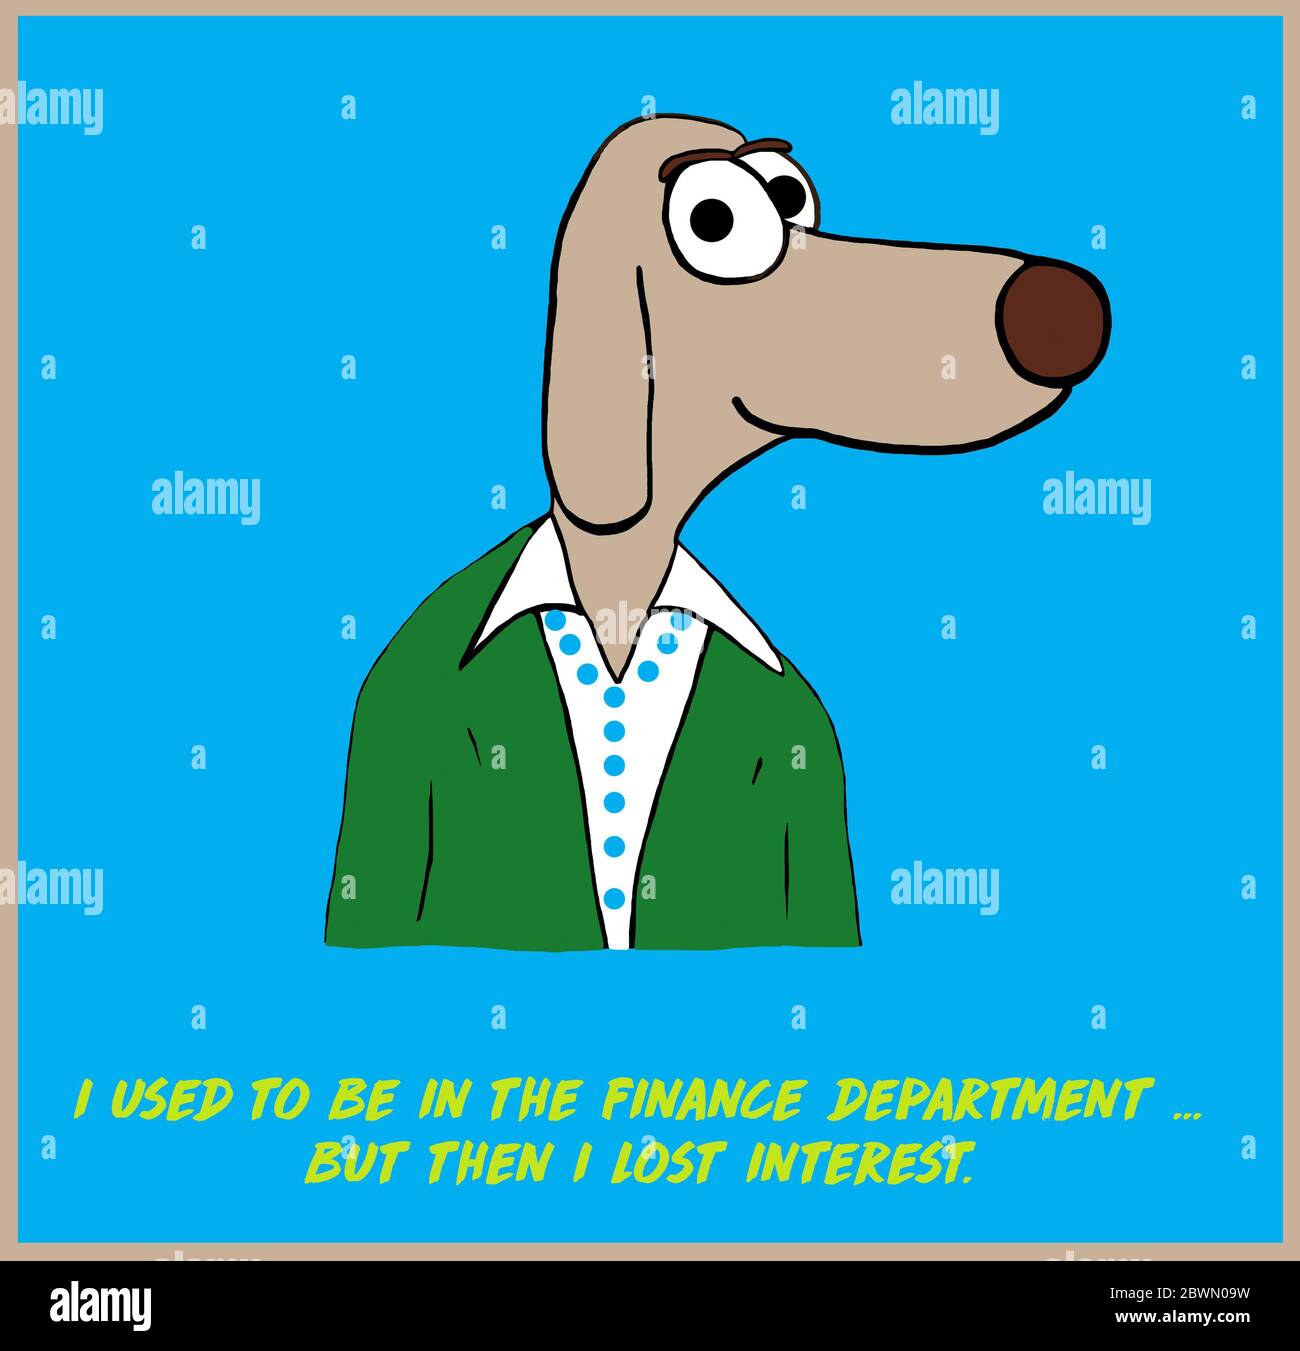 Color cartoon pun of a female dog who used to be in the finance department, but then lost interest. Stock Photo